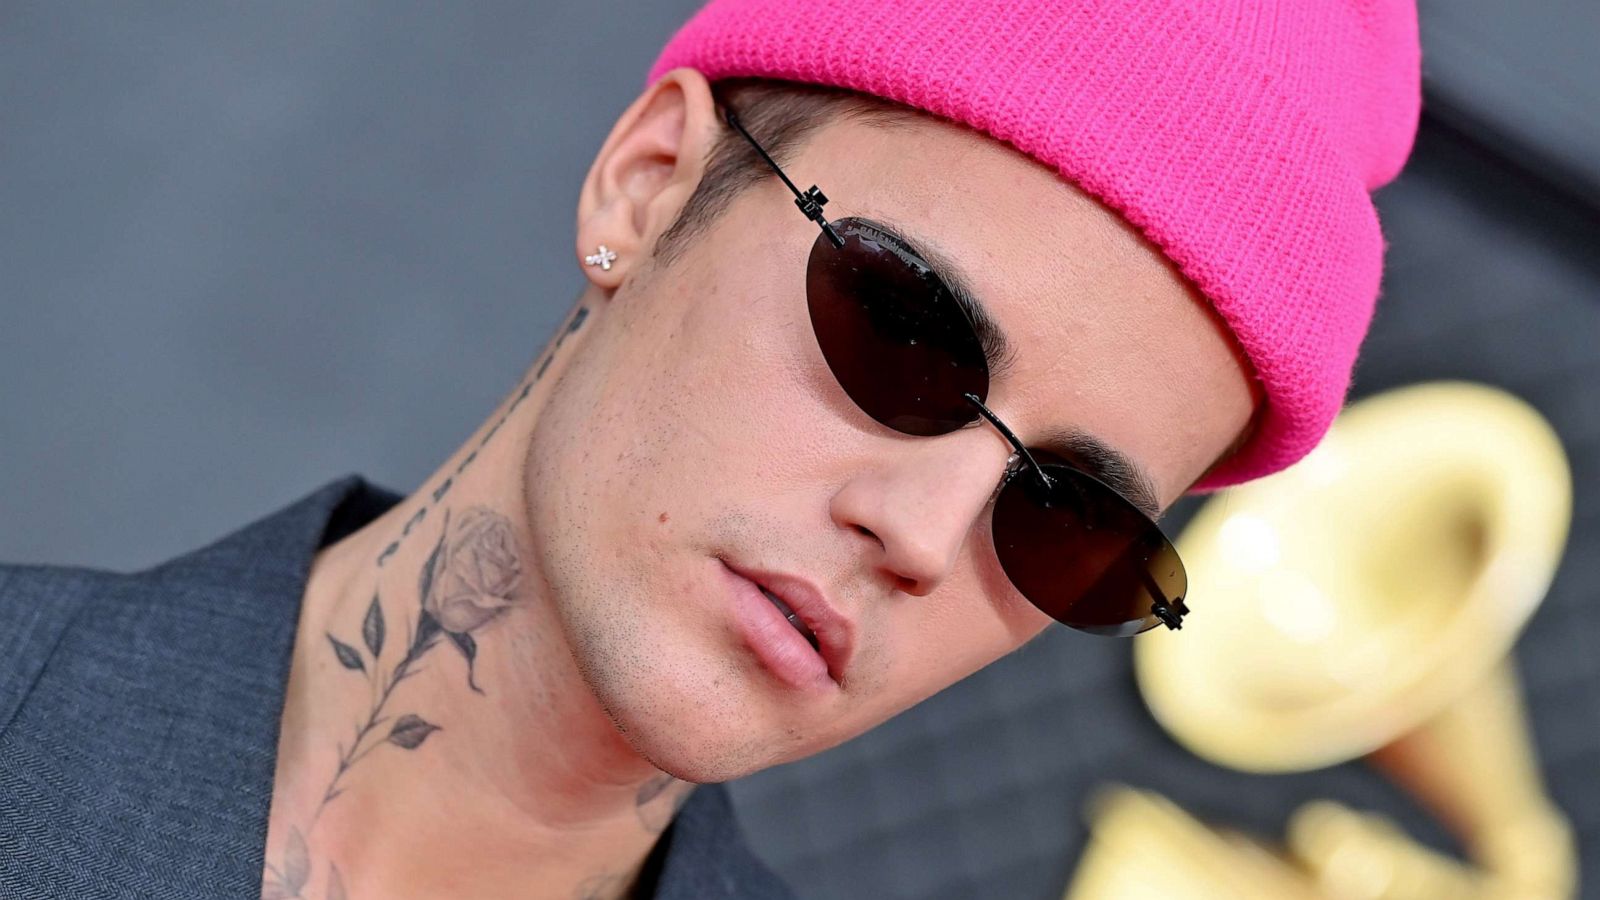 Don't buy it': Justin Bieber says H&M released new merchandise without his  approval - ABC News